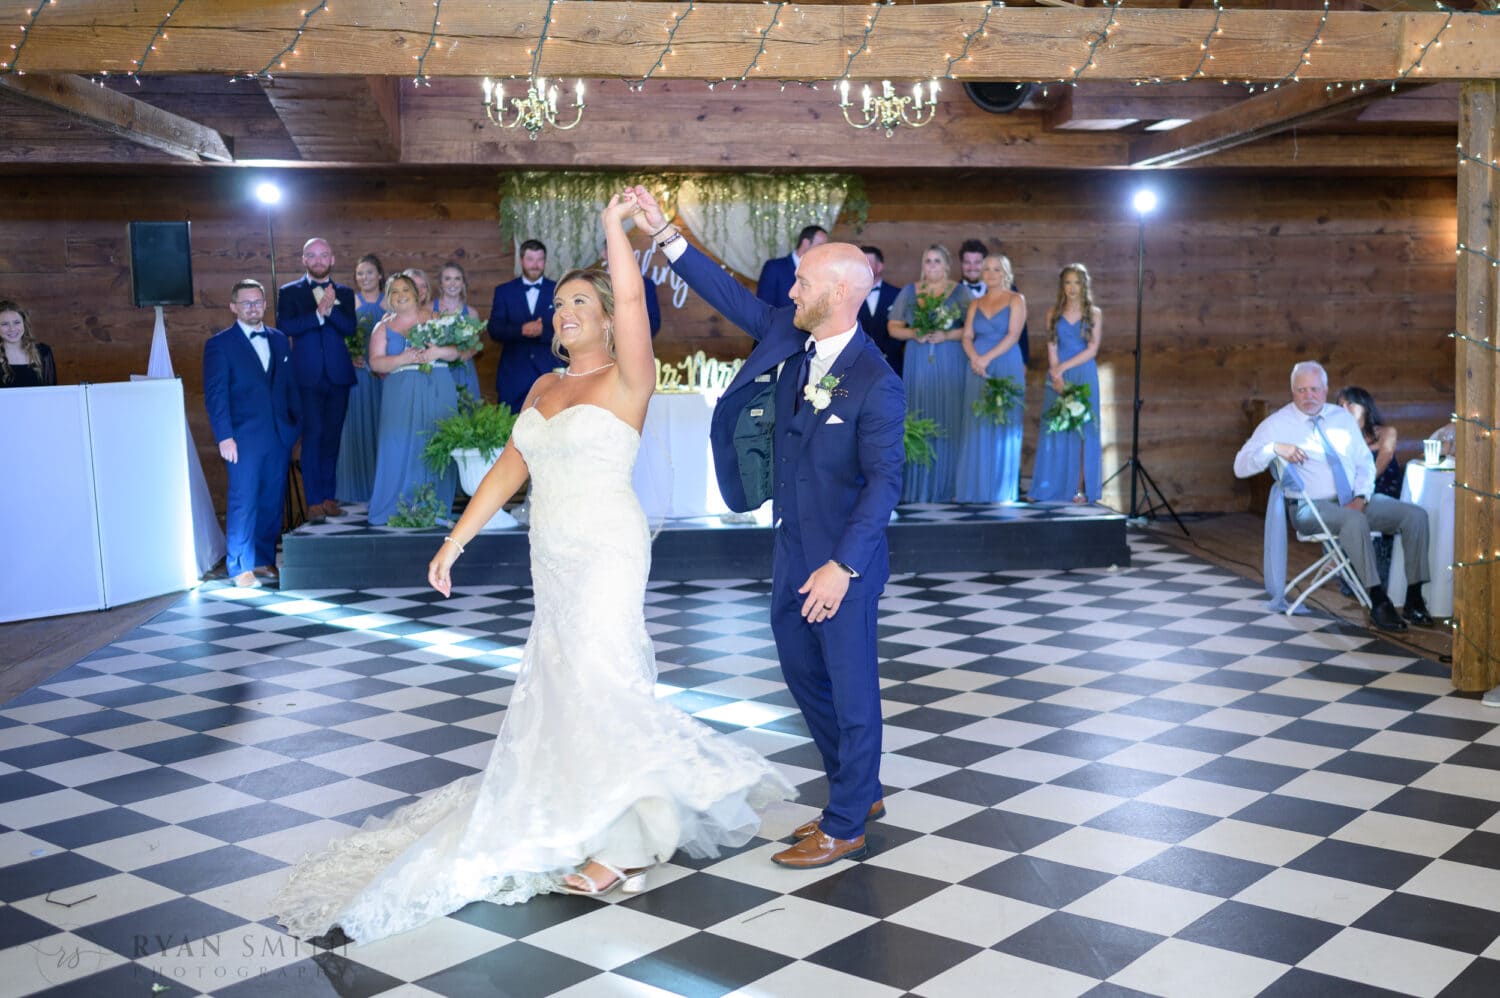 First dance with bride and groom - The Peanut Warehouse - Conway